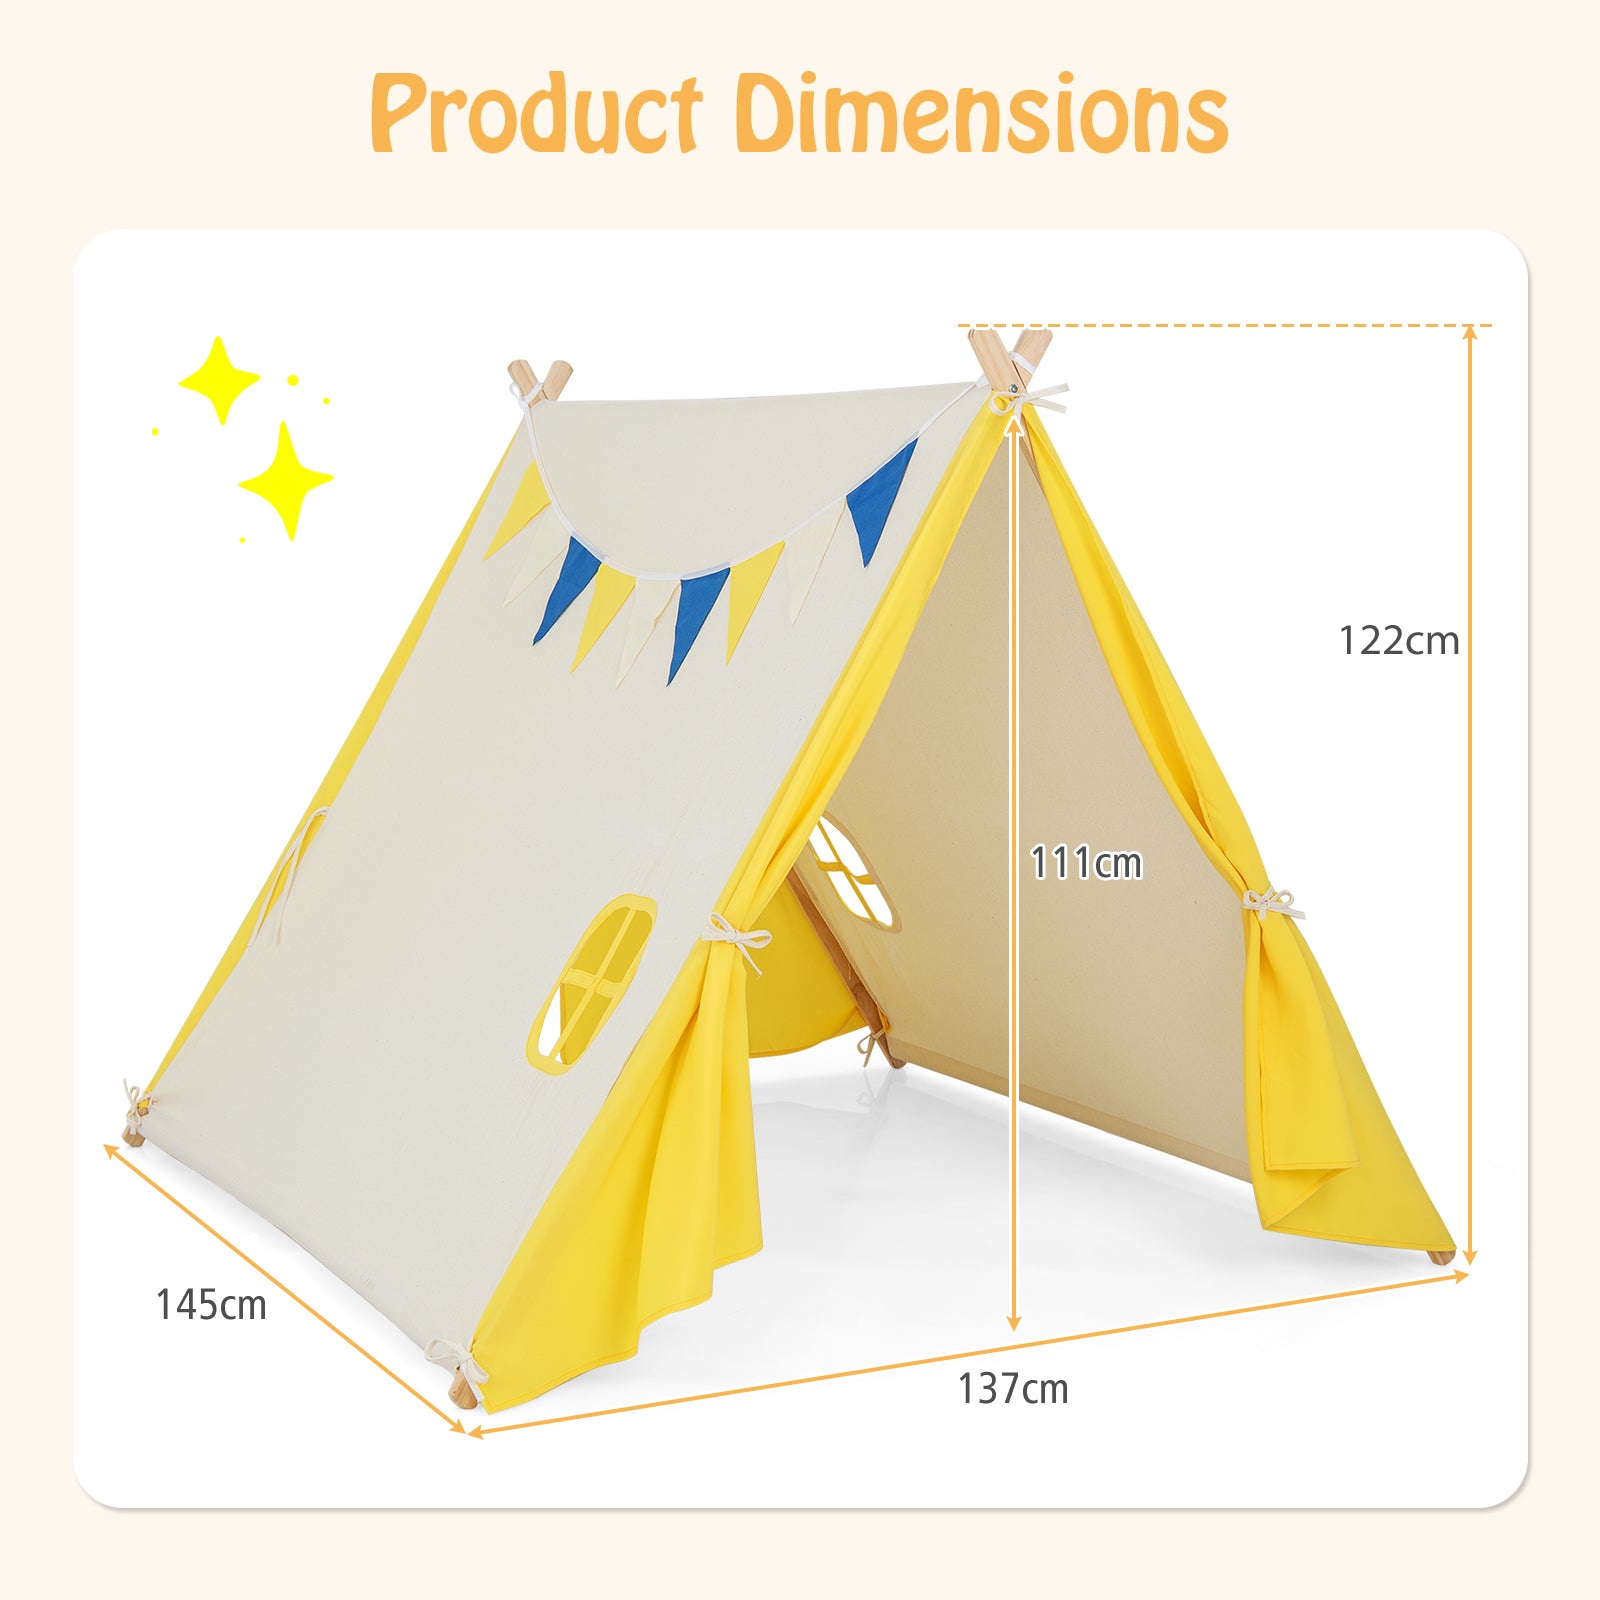 Kids Large Triangular Playhouse Tent with Selected Pine Wood Material-Yellow